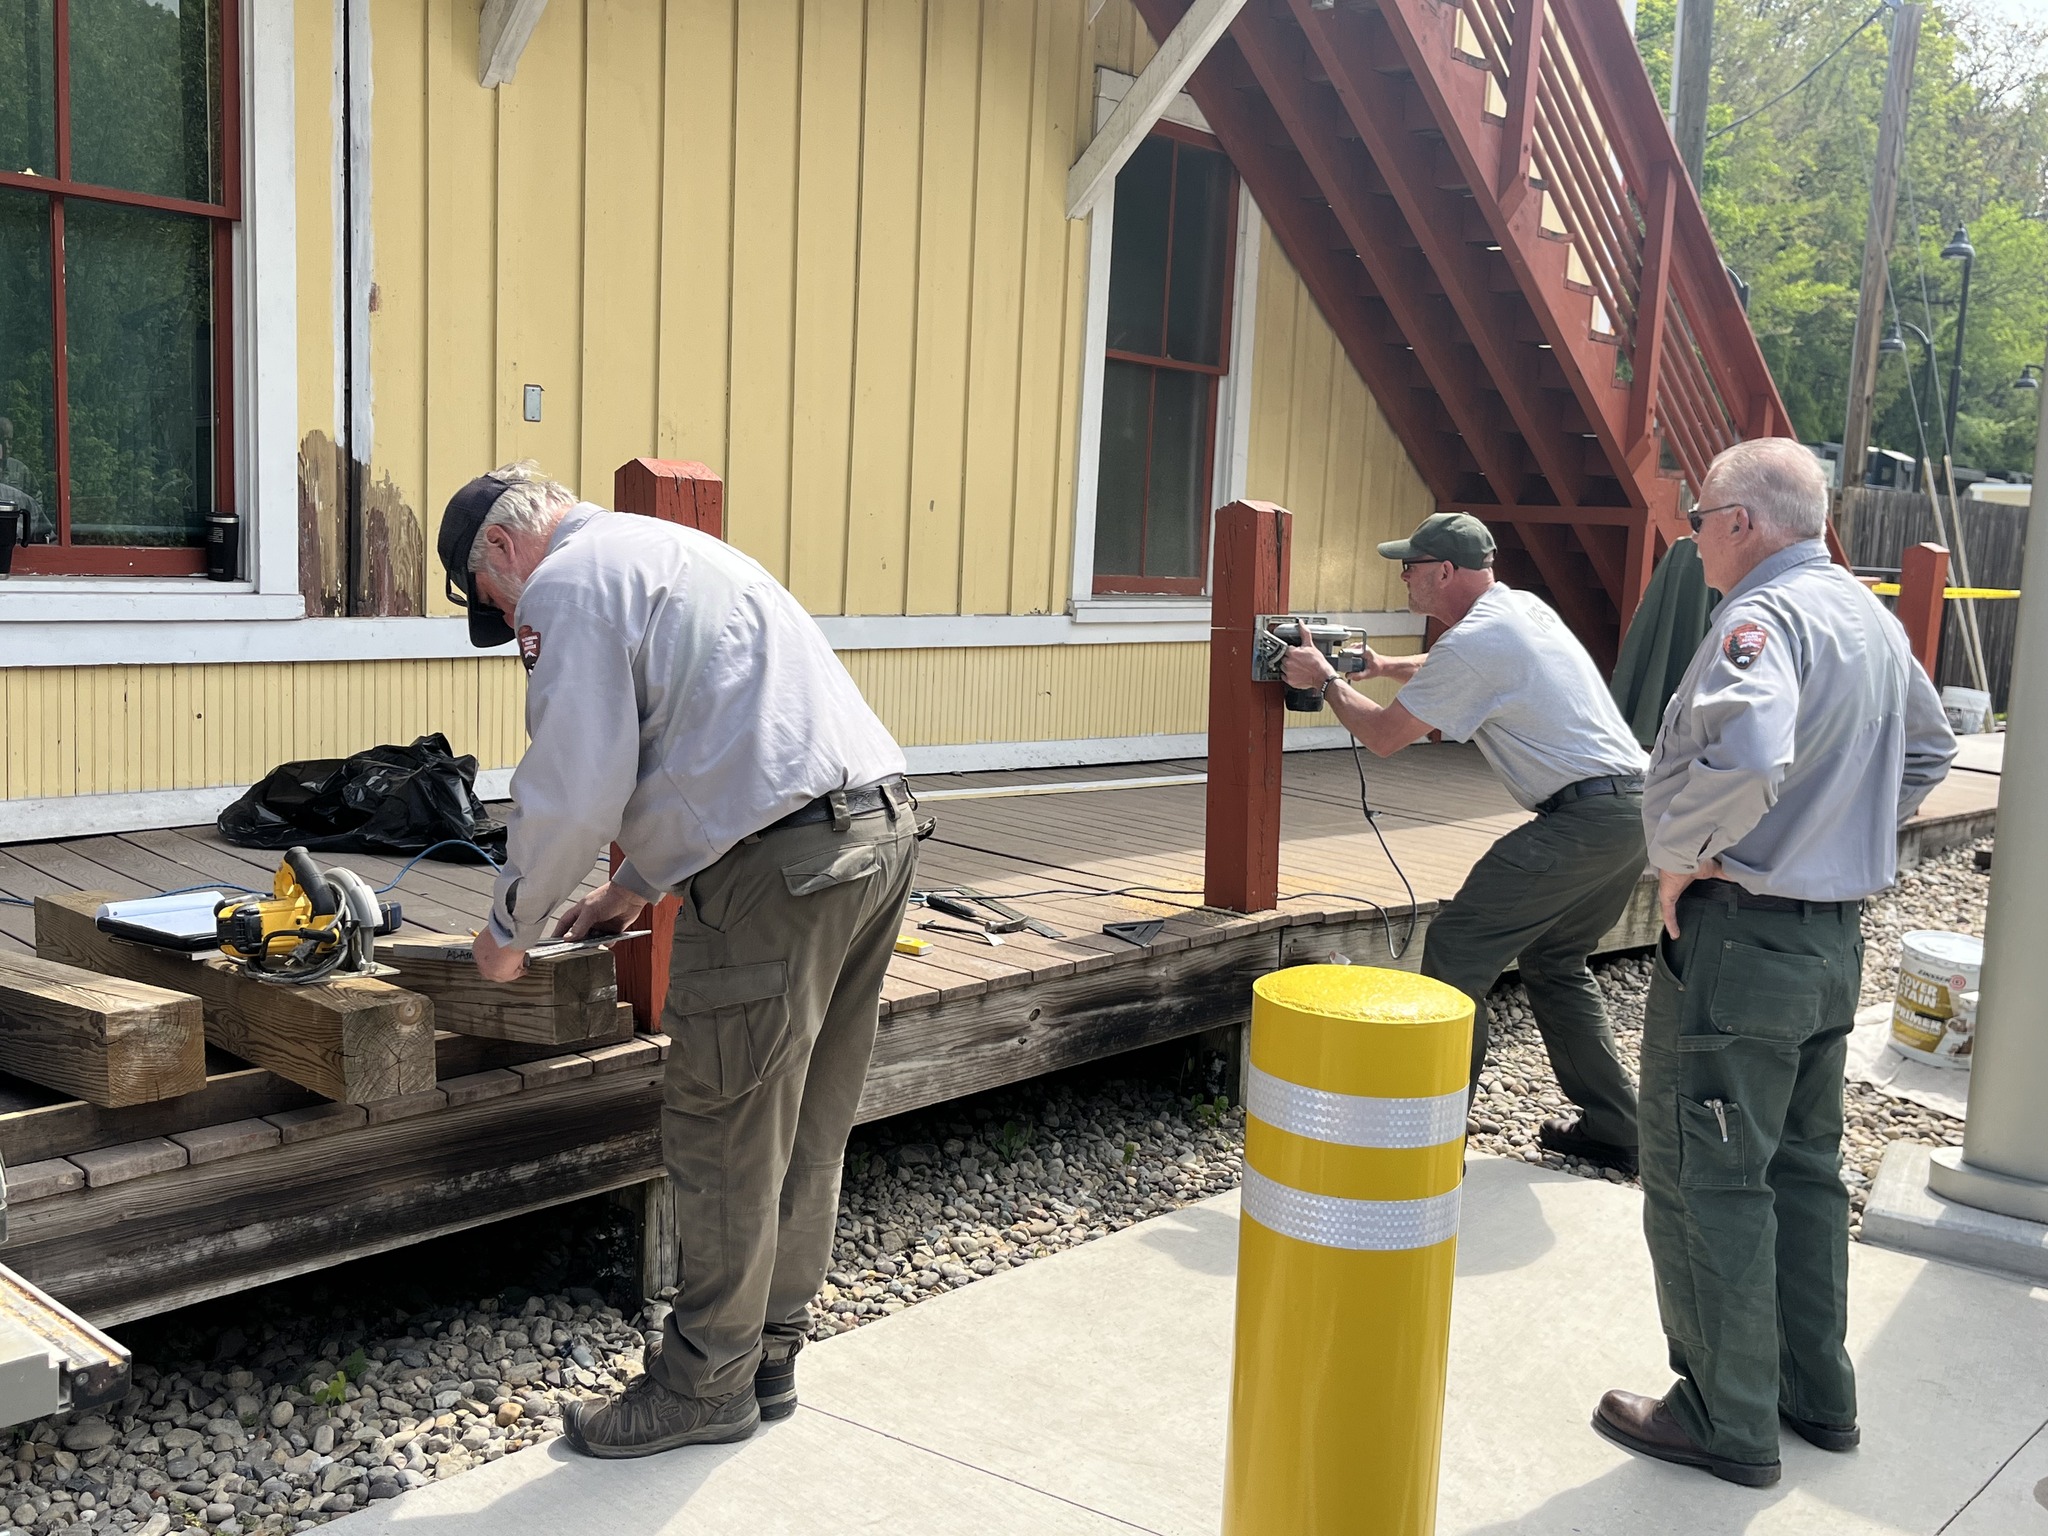 Three rangers in front of historic train depot working on fixing wooden posts using power tools